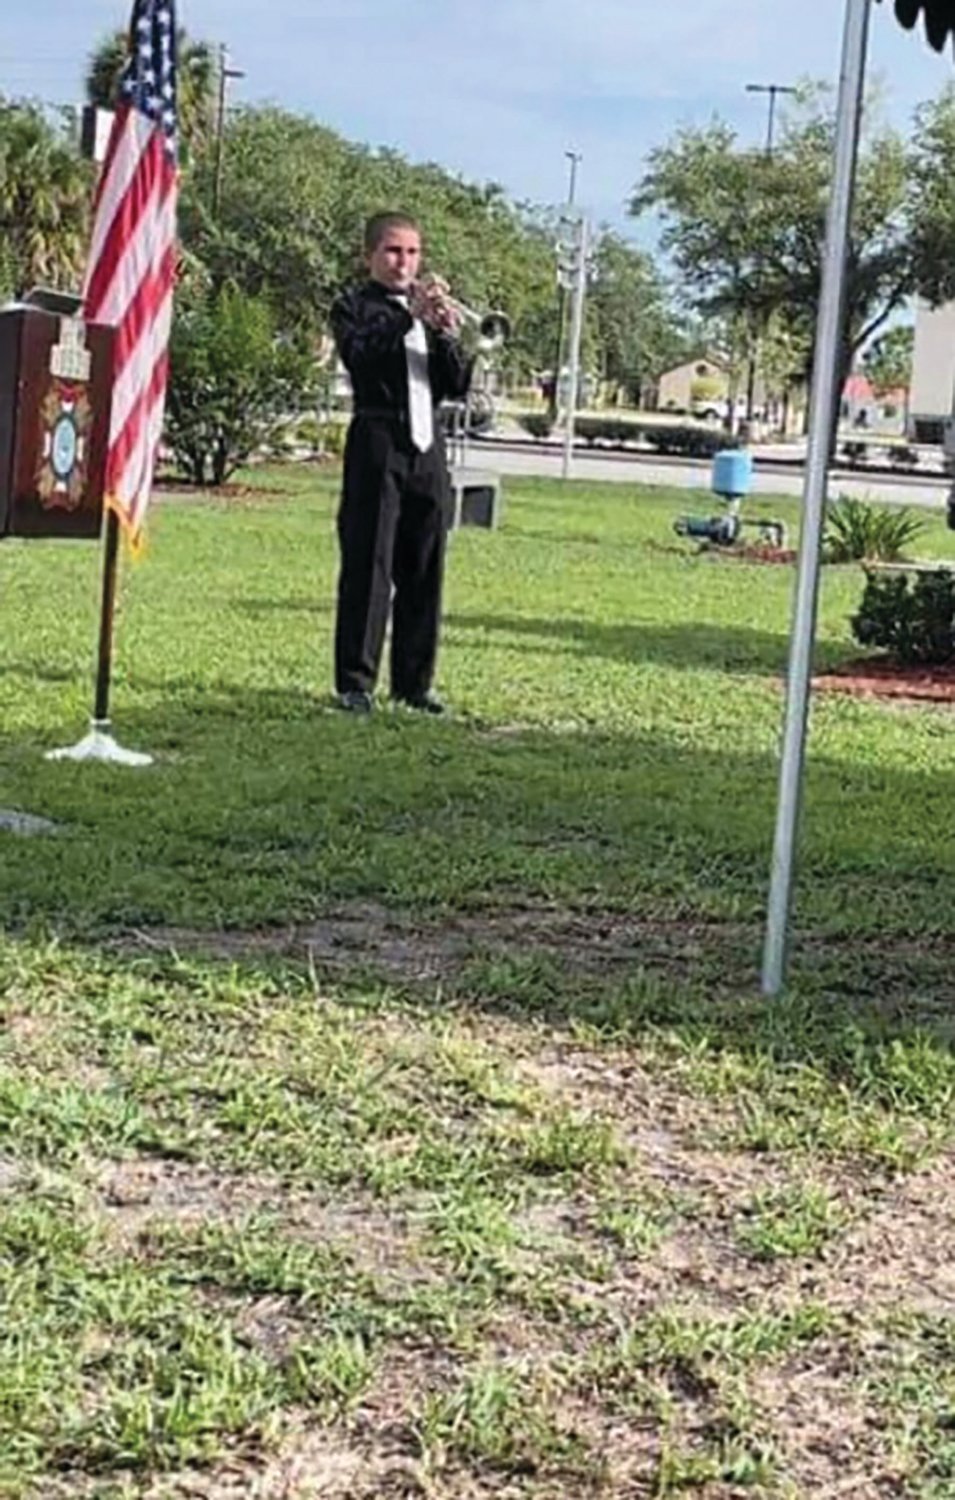 Rocco Cohen played Taps during the Memorial Day ceremony in Veteran's Park on Memorial Day, 2022.